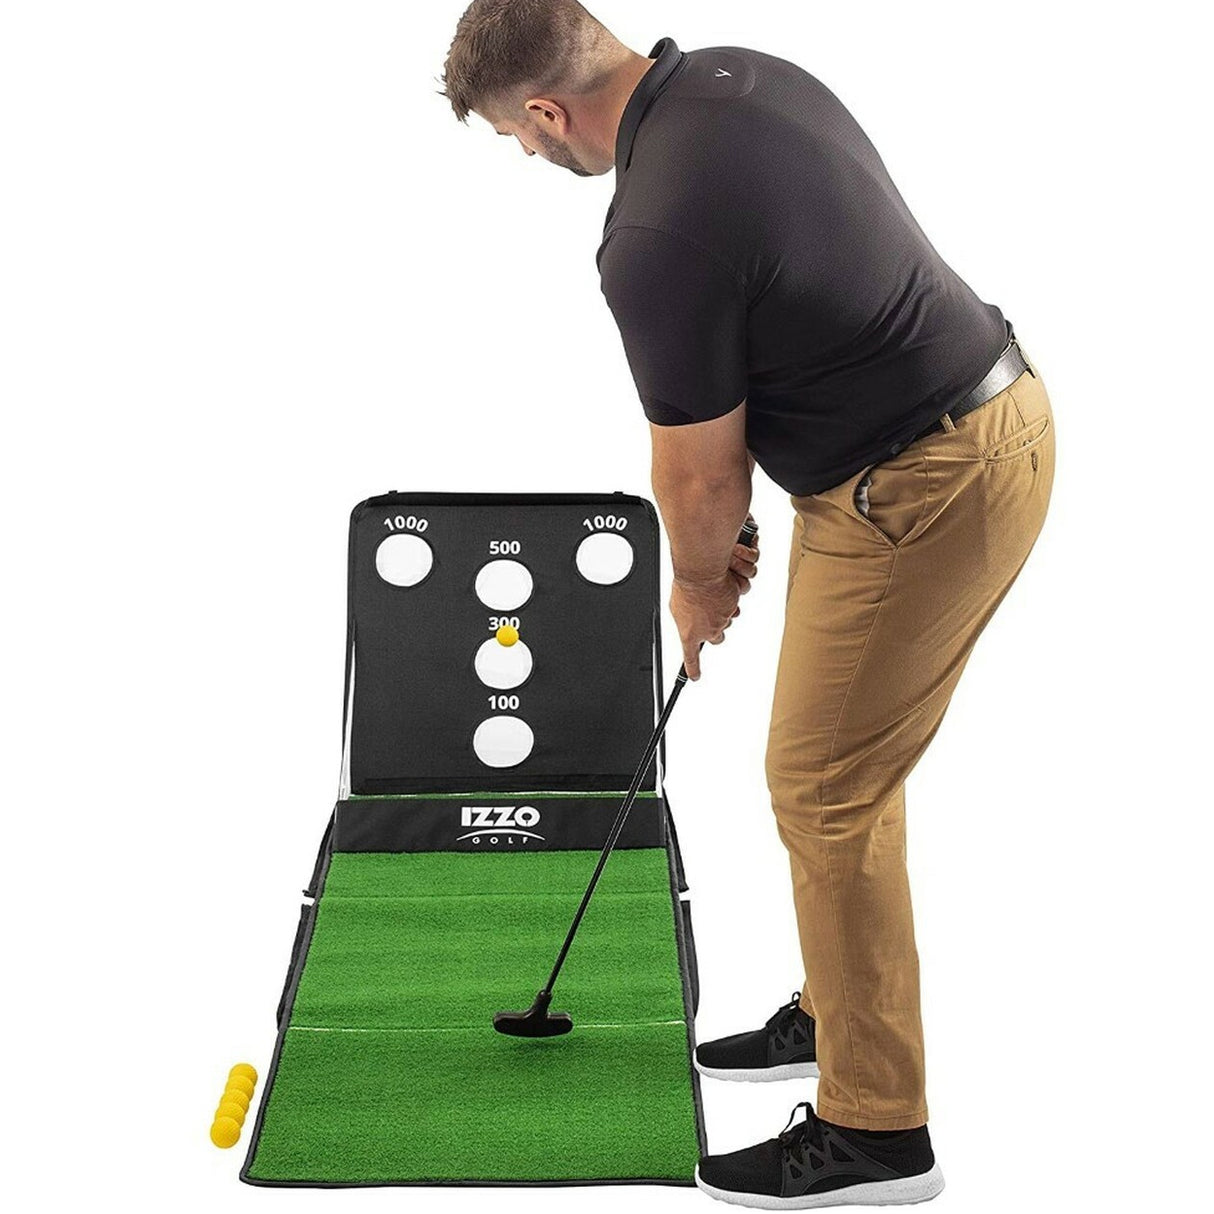 IZZO Skee-Golf Practice and Game Set